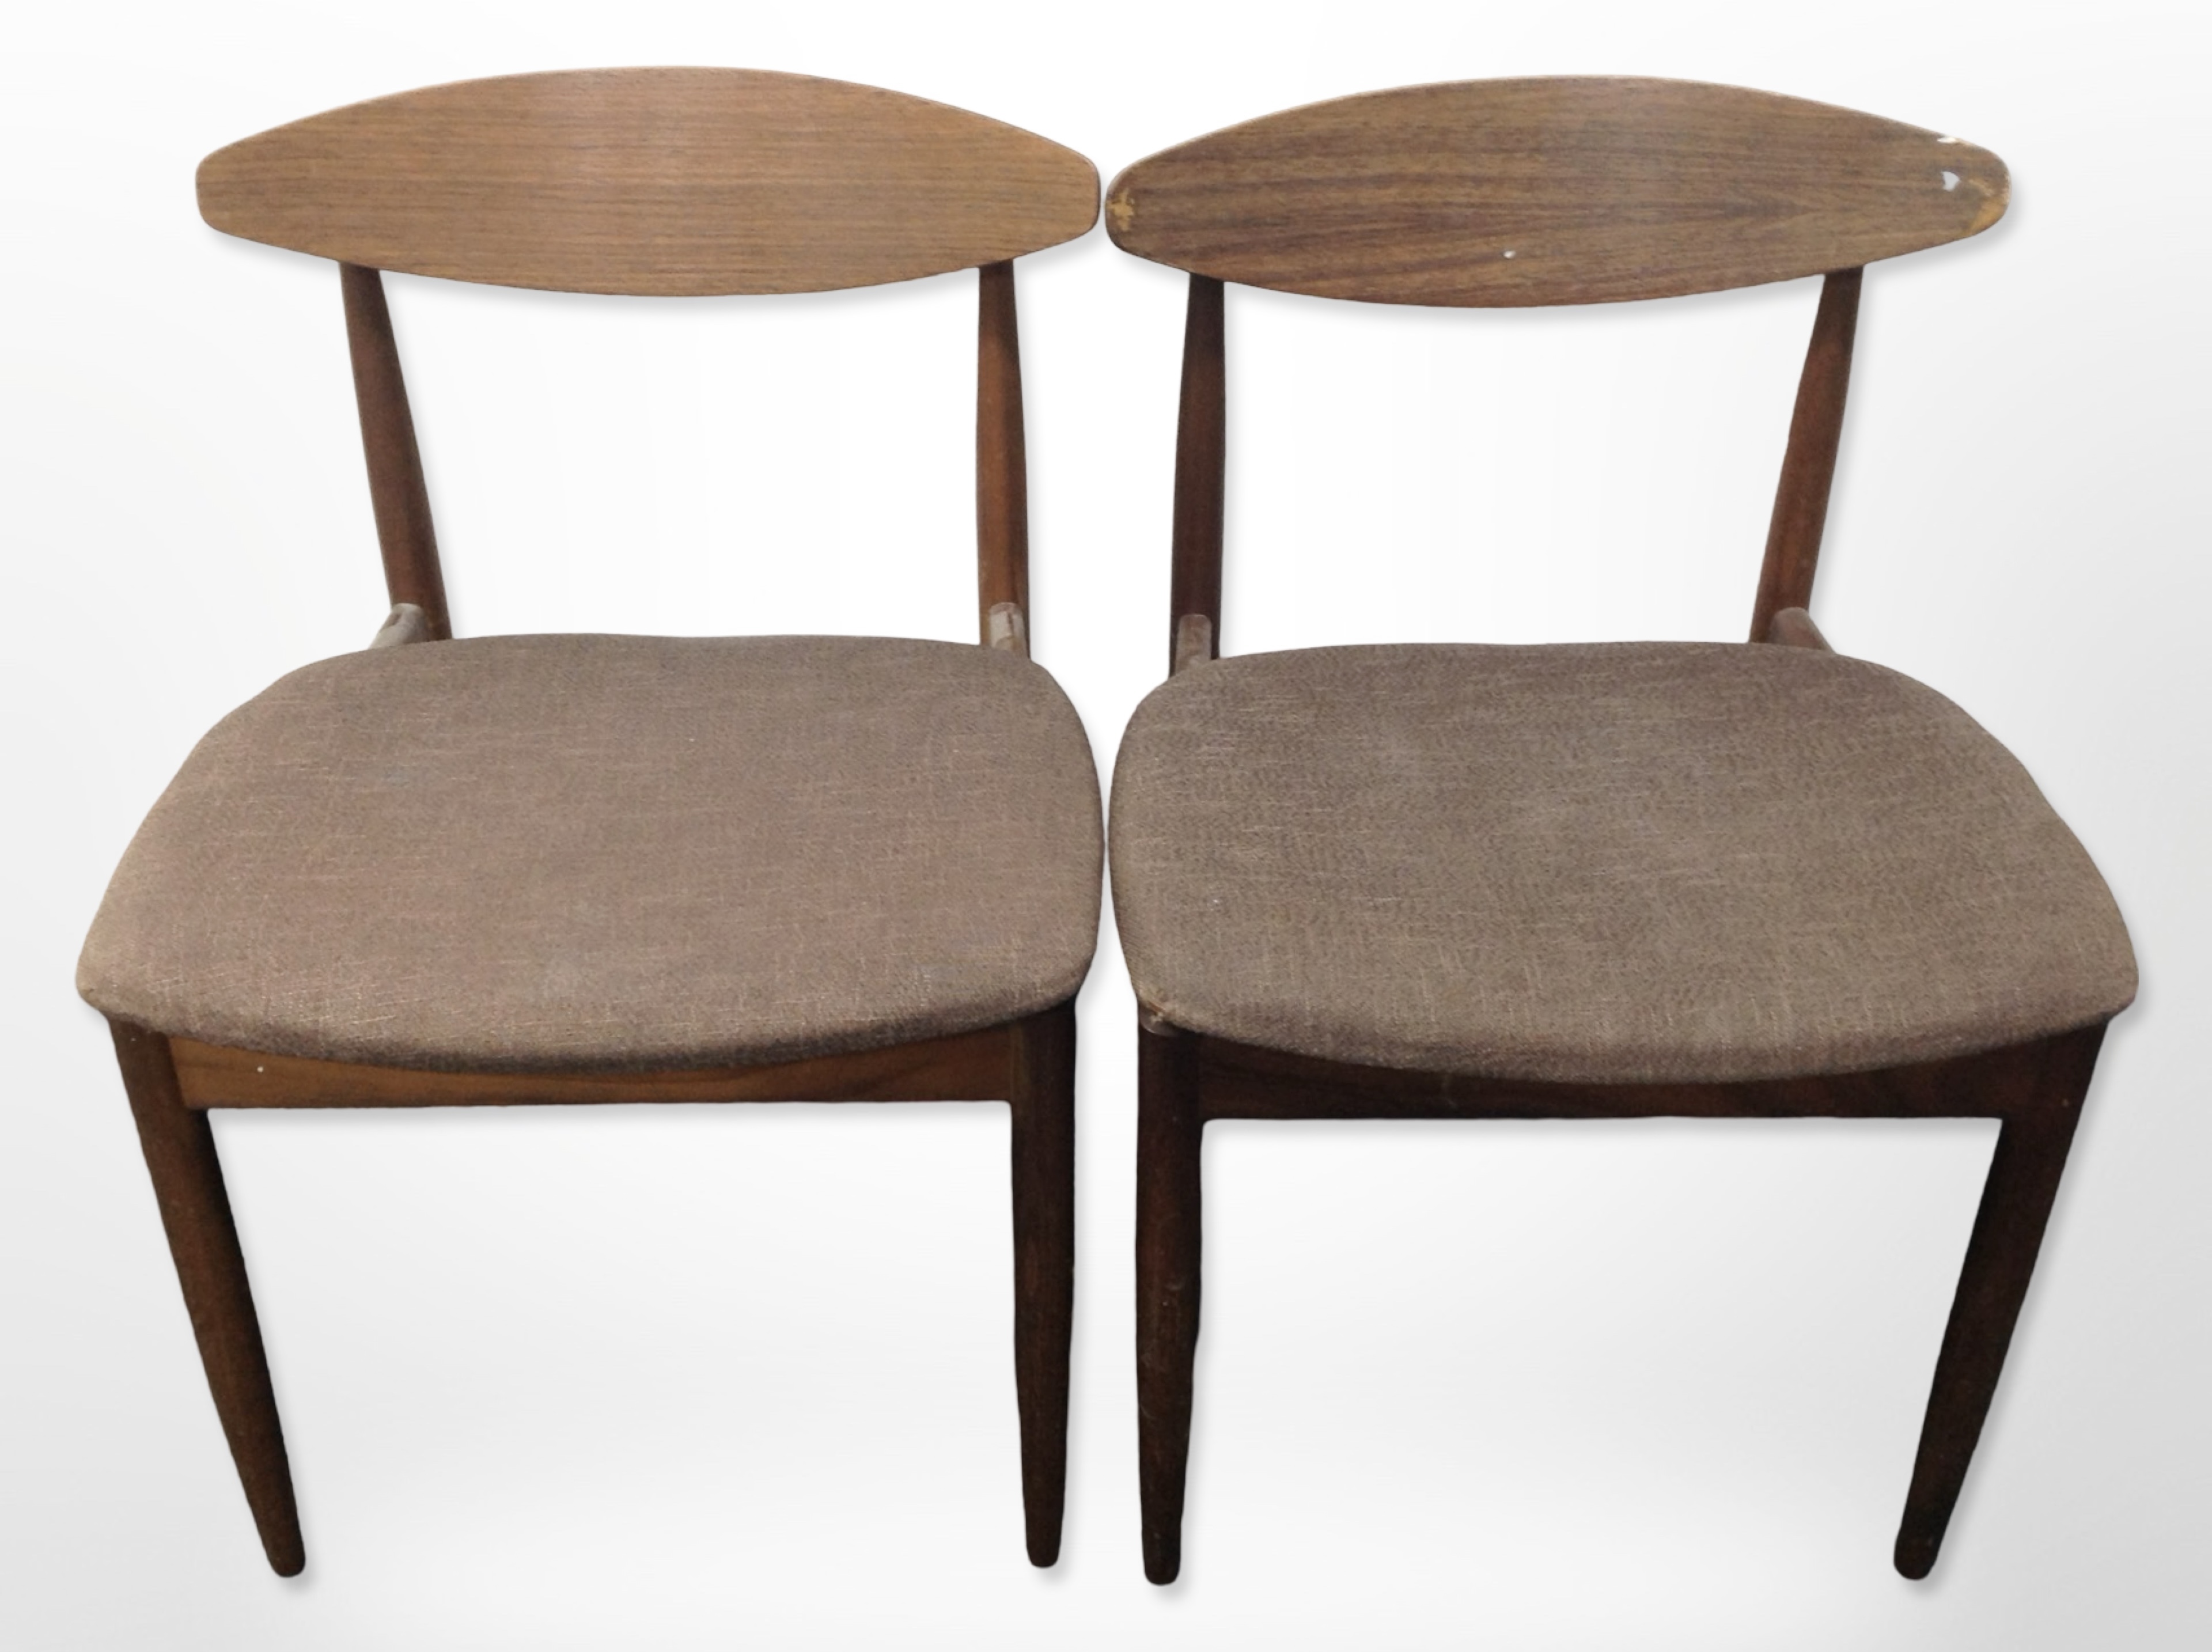 A pair of 20th-century G Plan teak-framed dining chairs in dark brown upholstery.